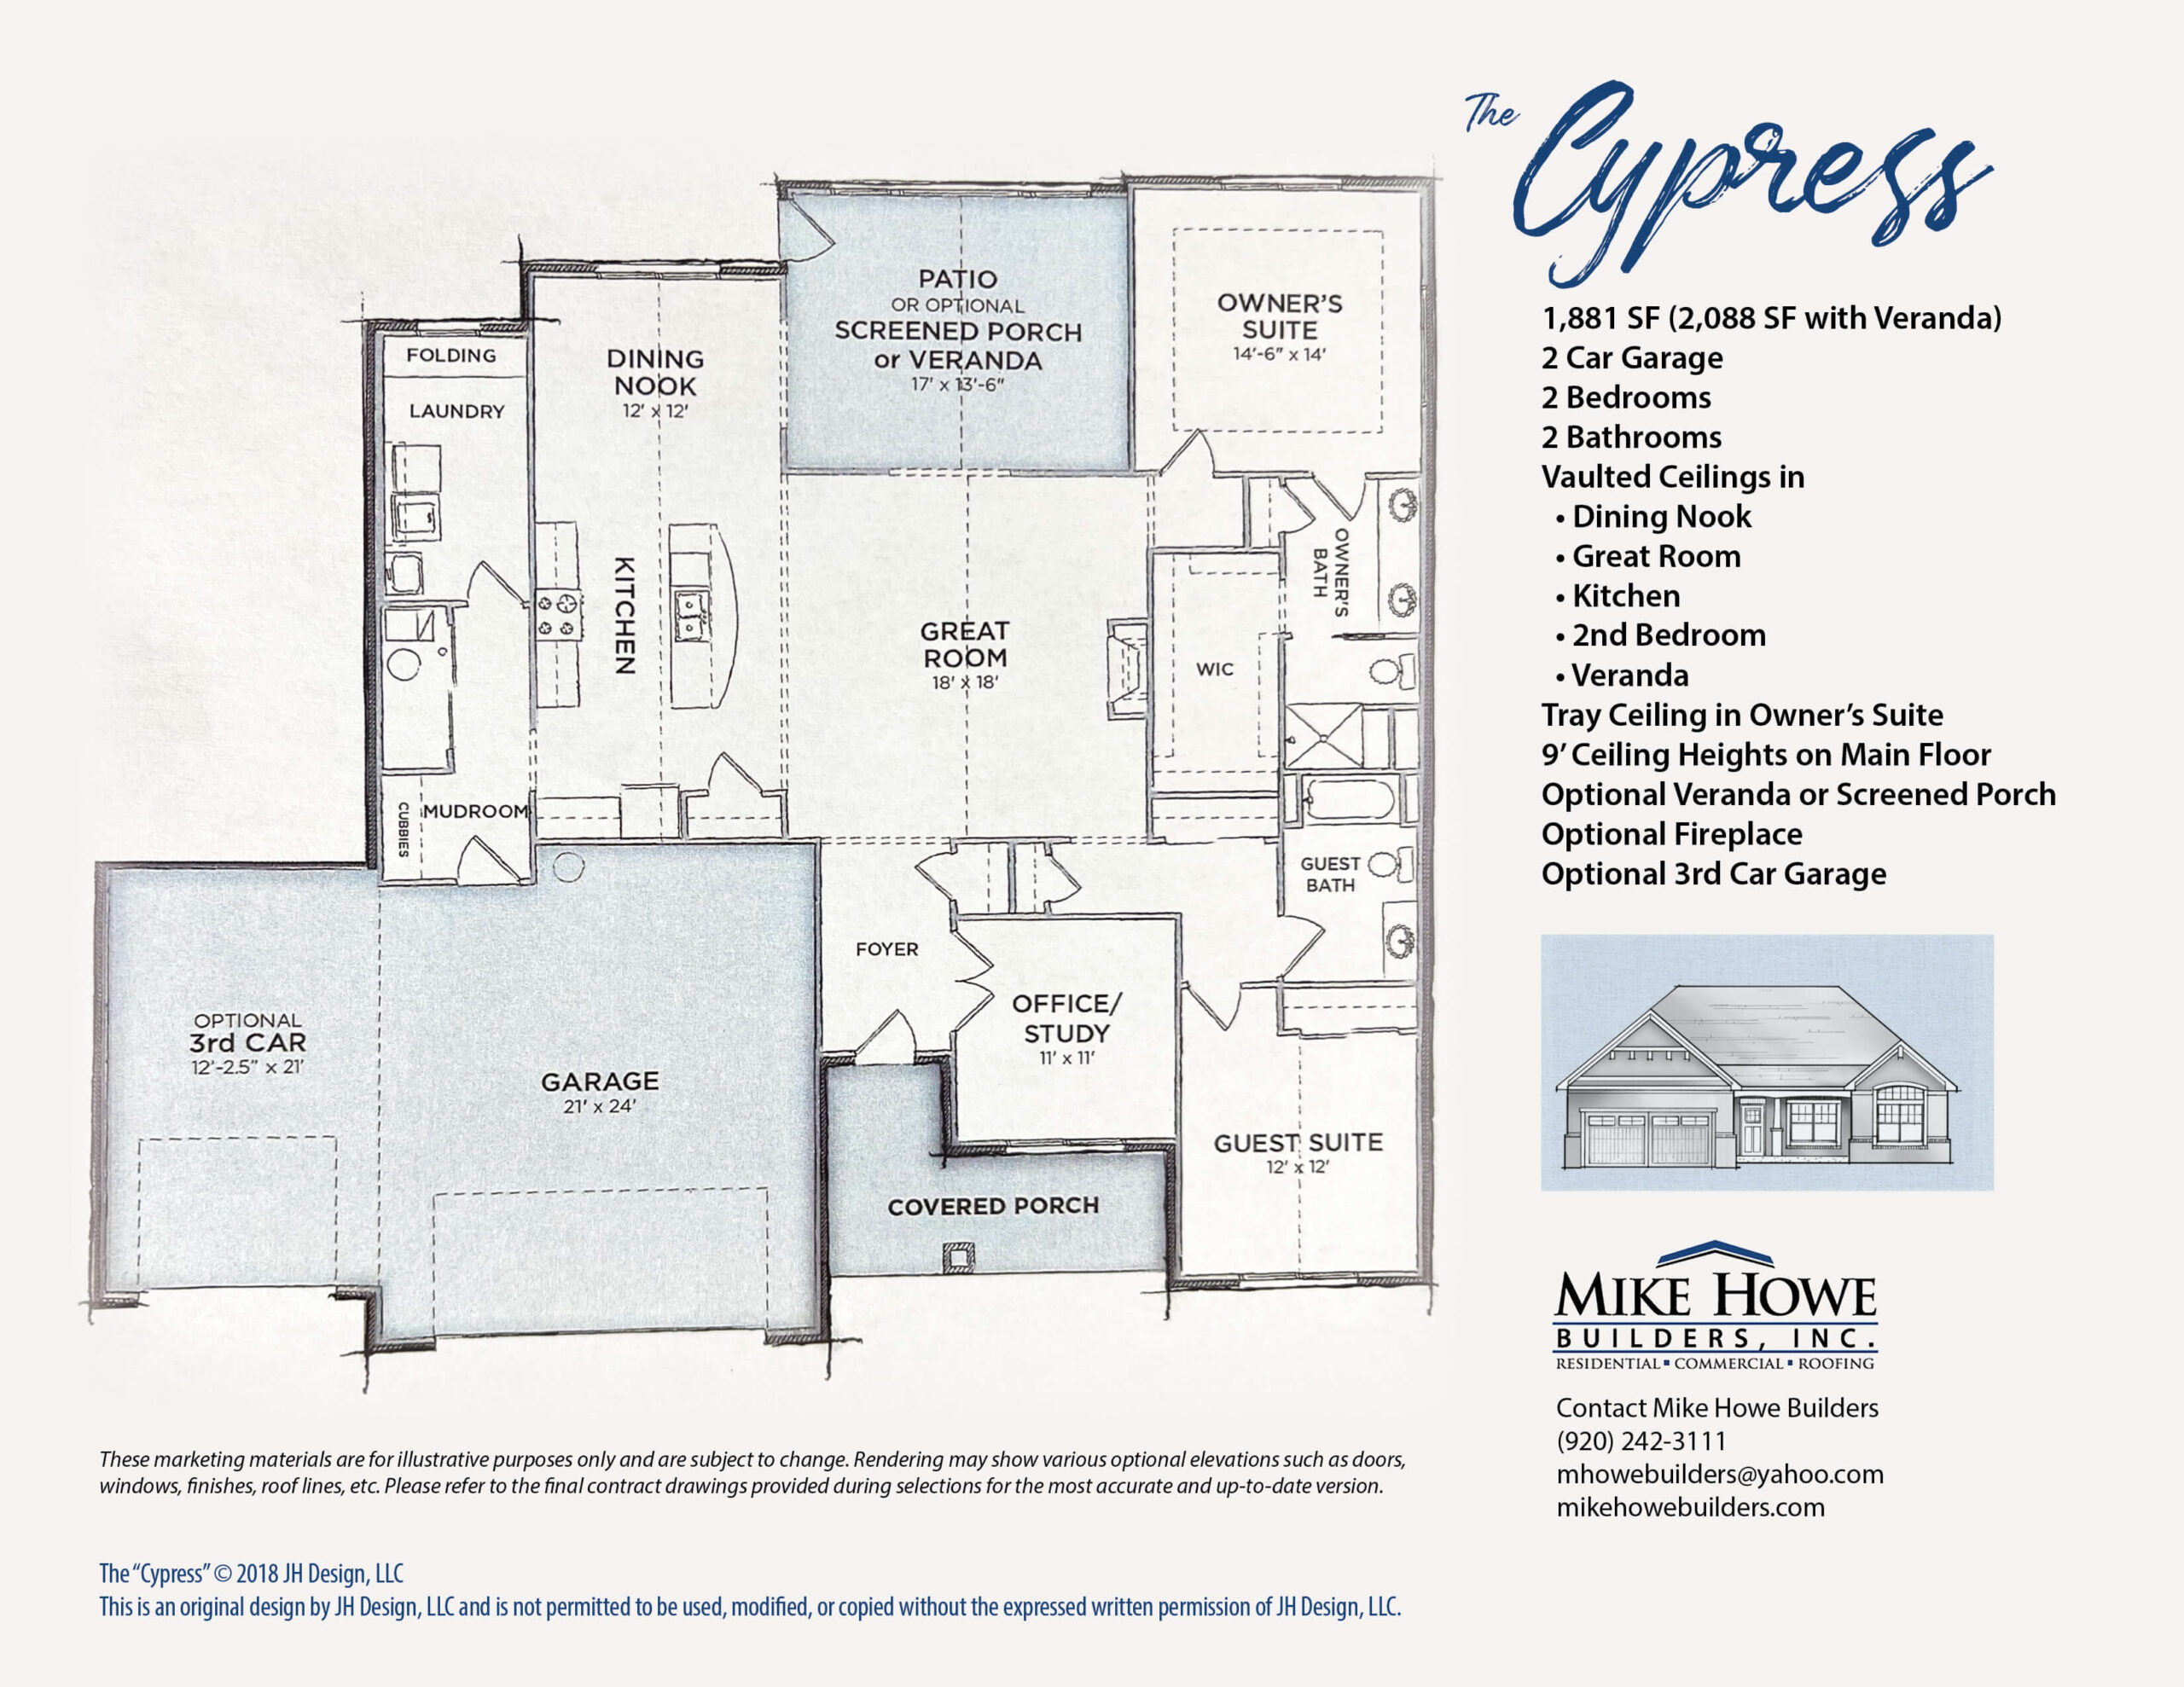 The Cypress Floor Plan and Detail